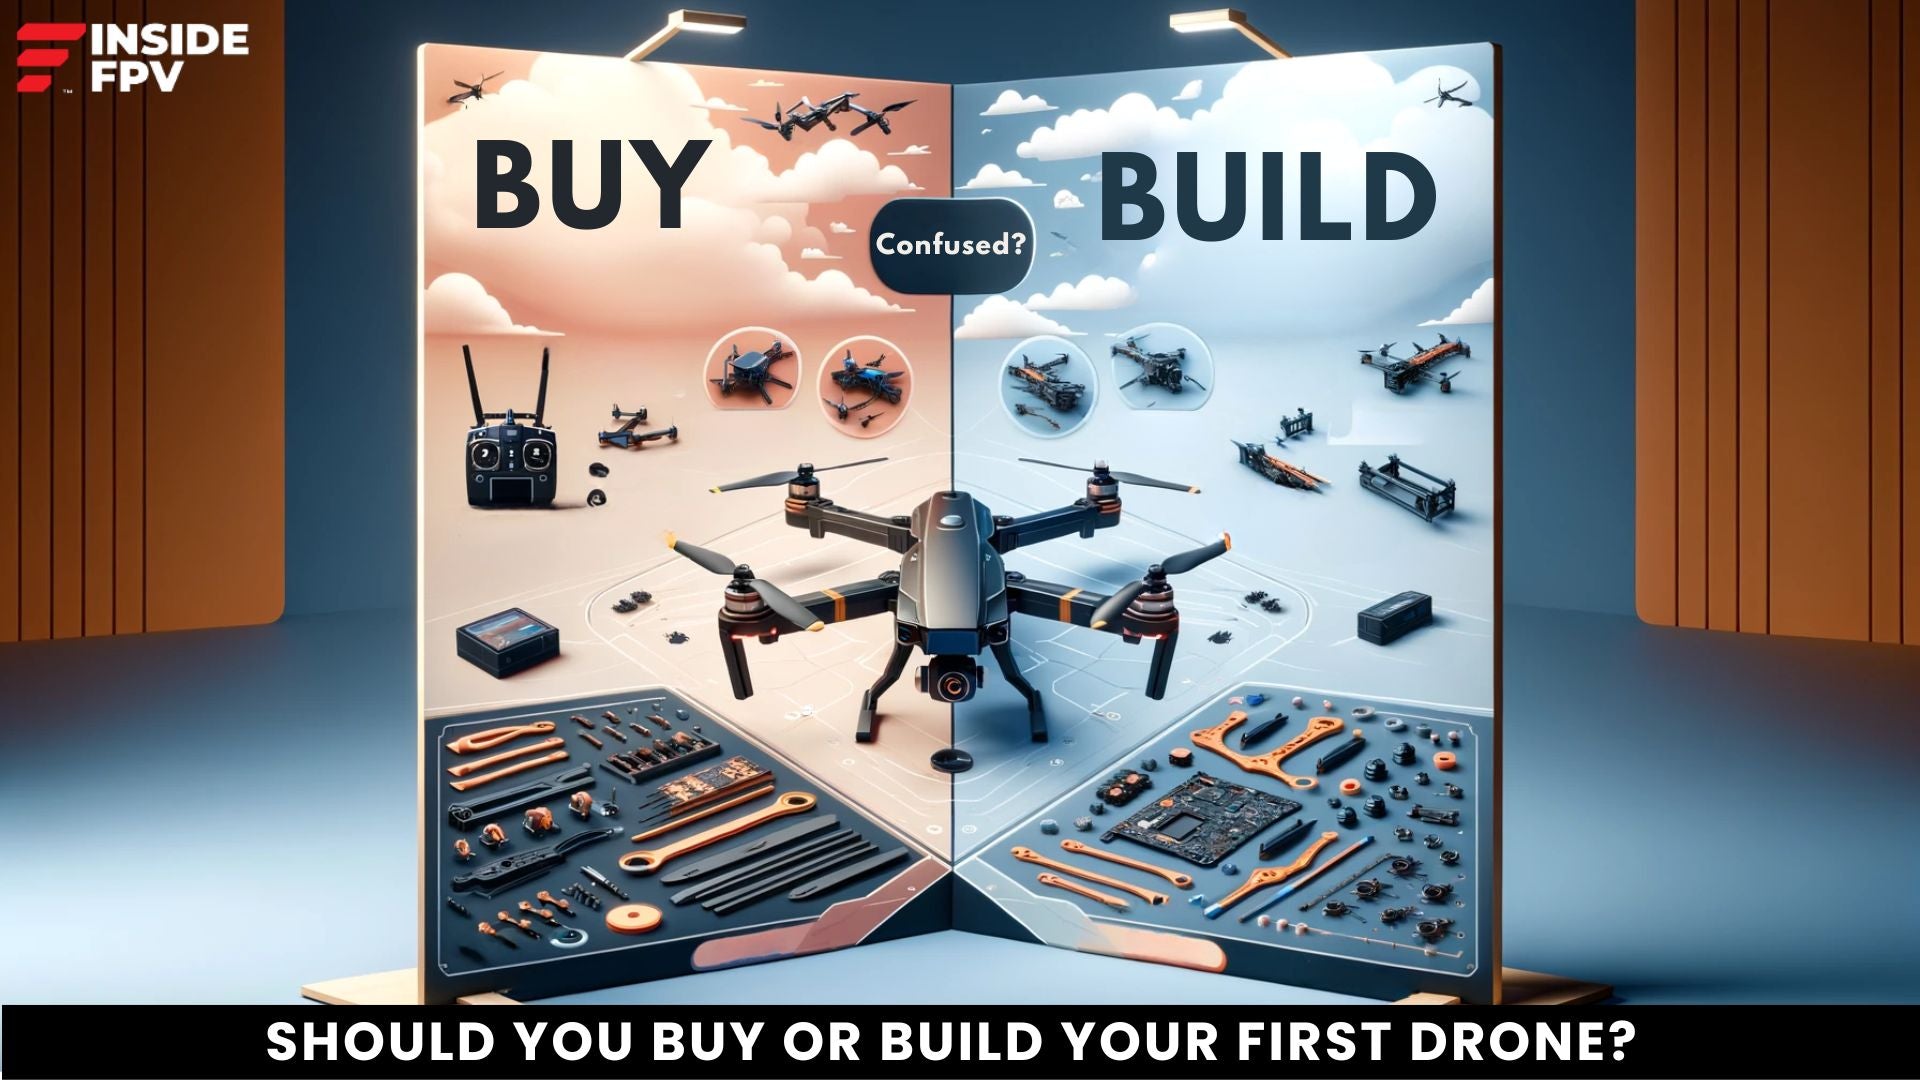 SHOULD YOU BUY OR BUILD YOUR FIRST DRONE?